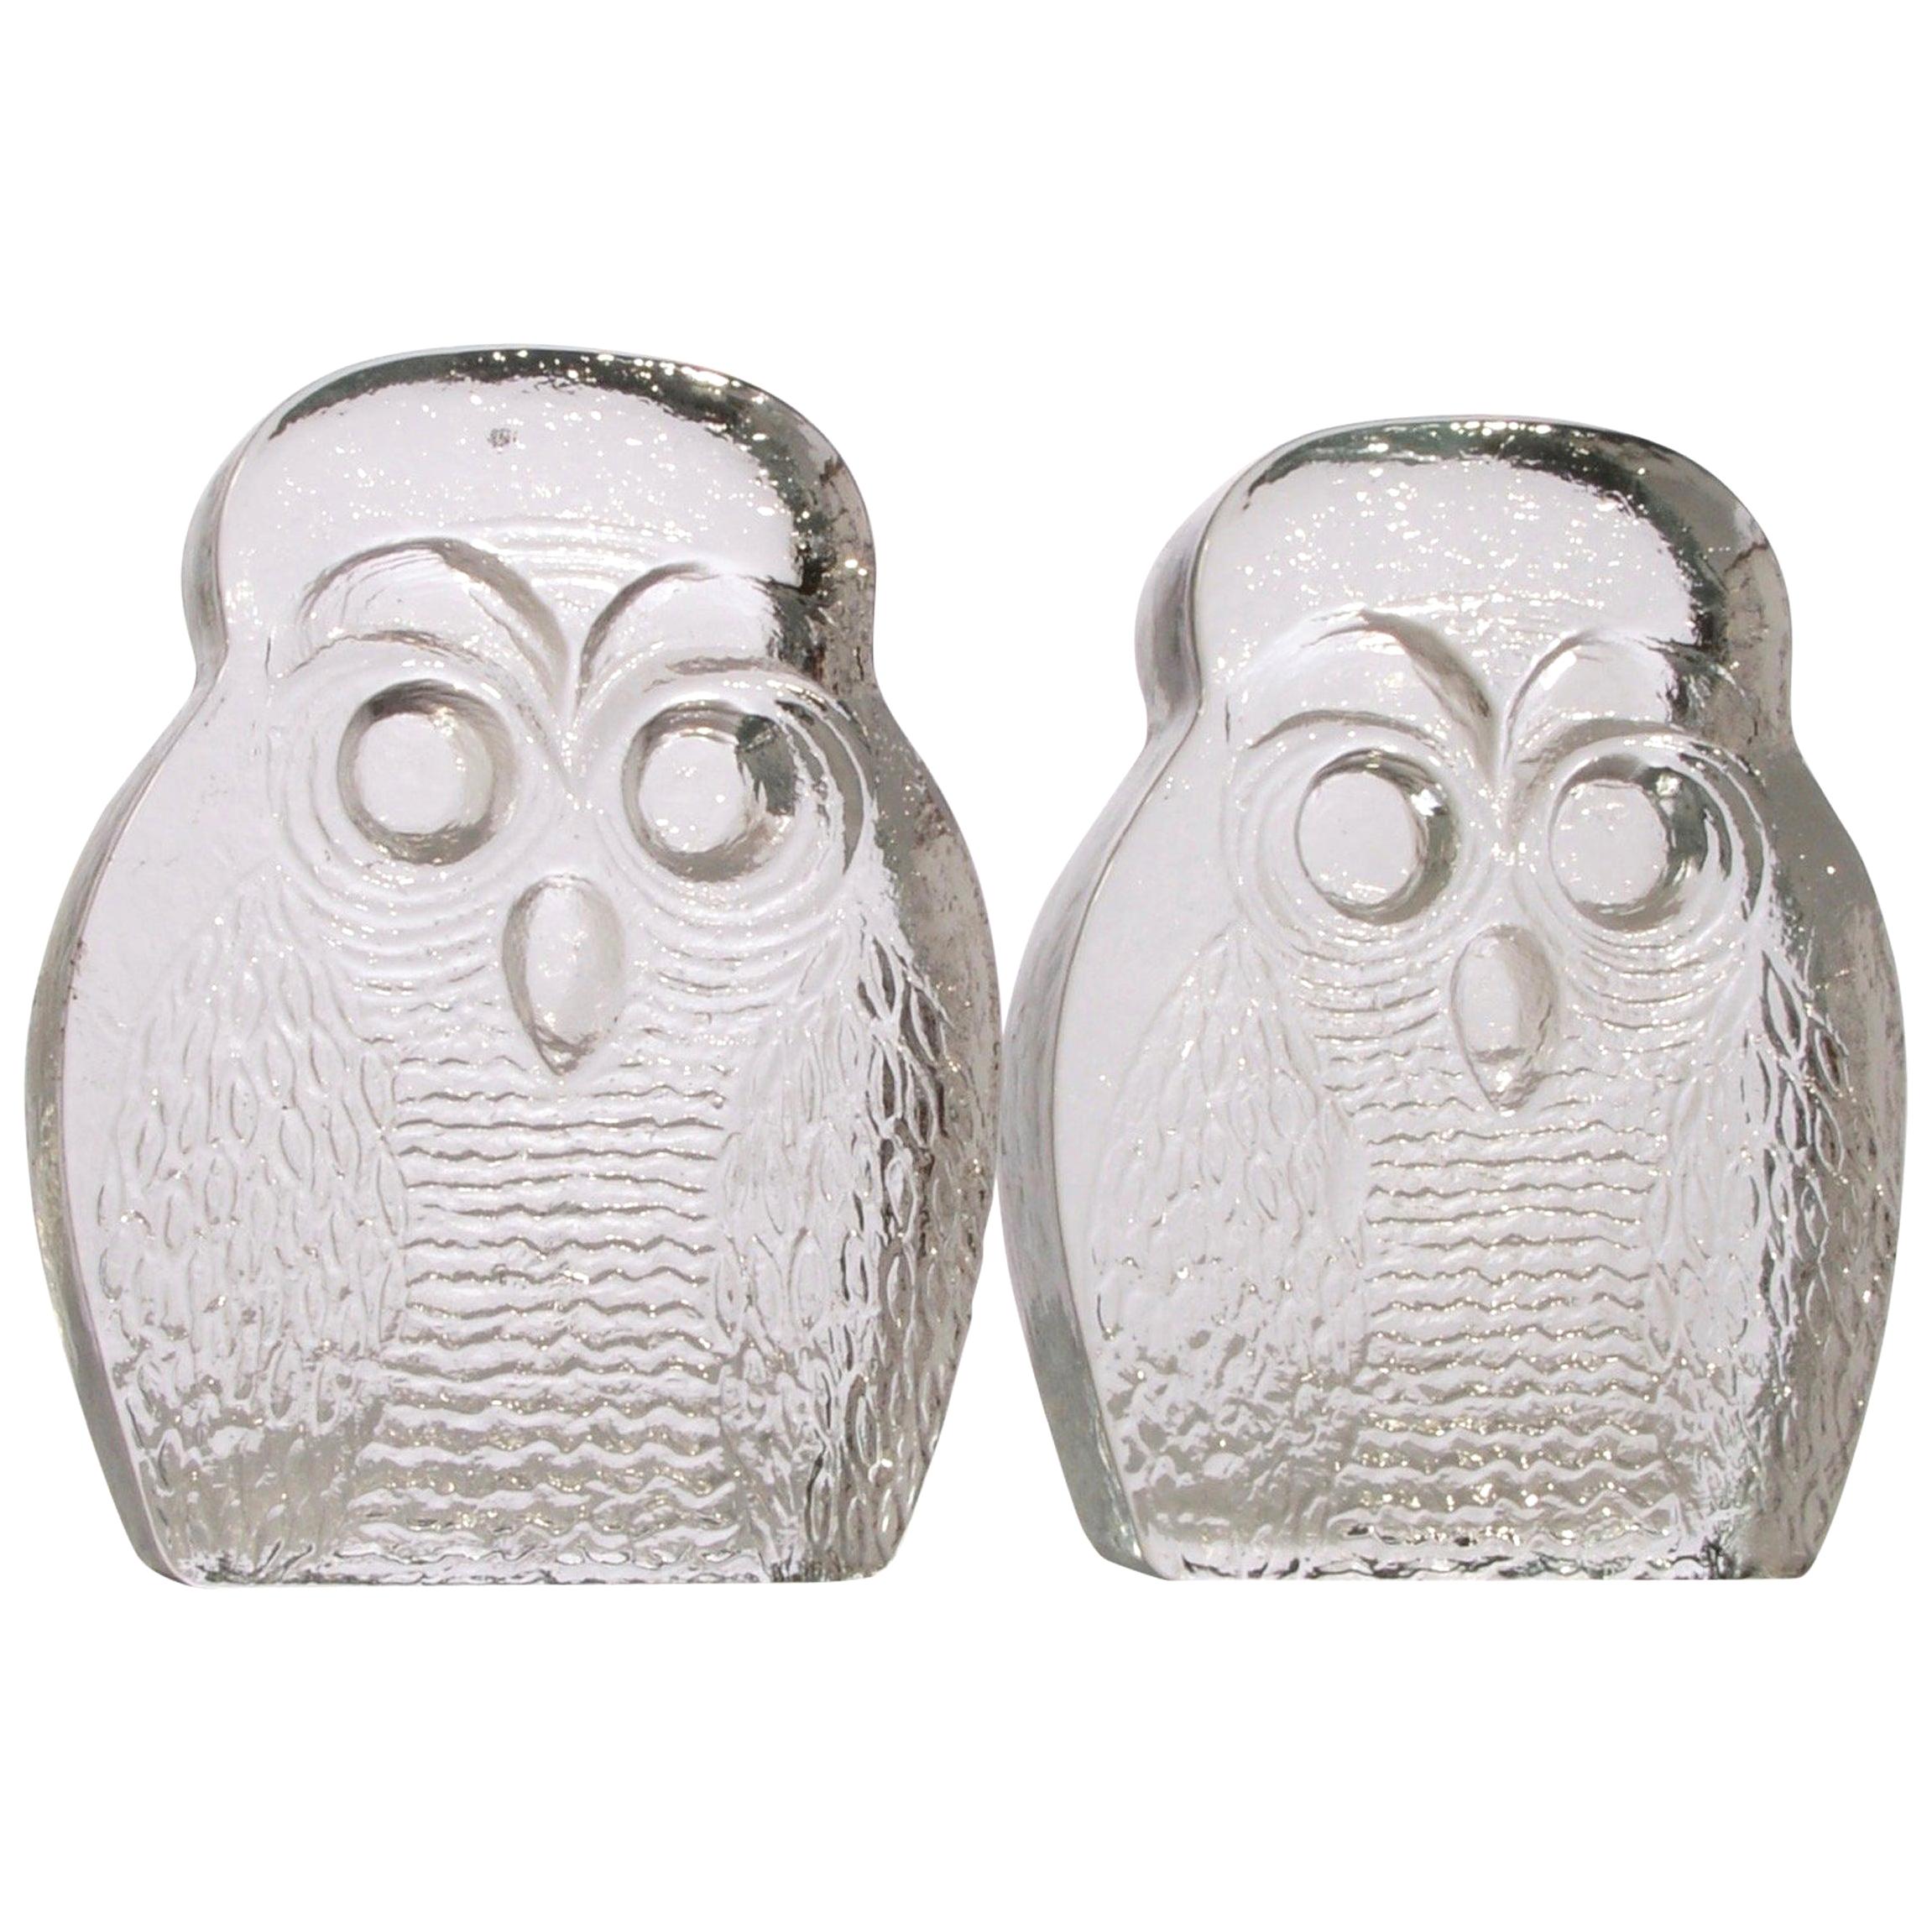 Owl Bookends by Blenko